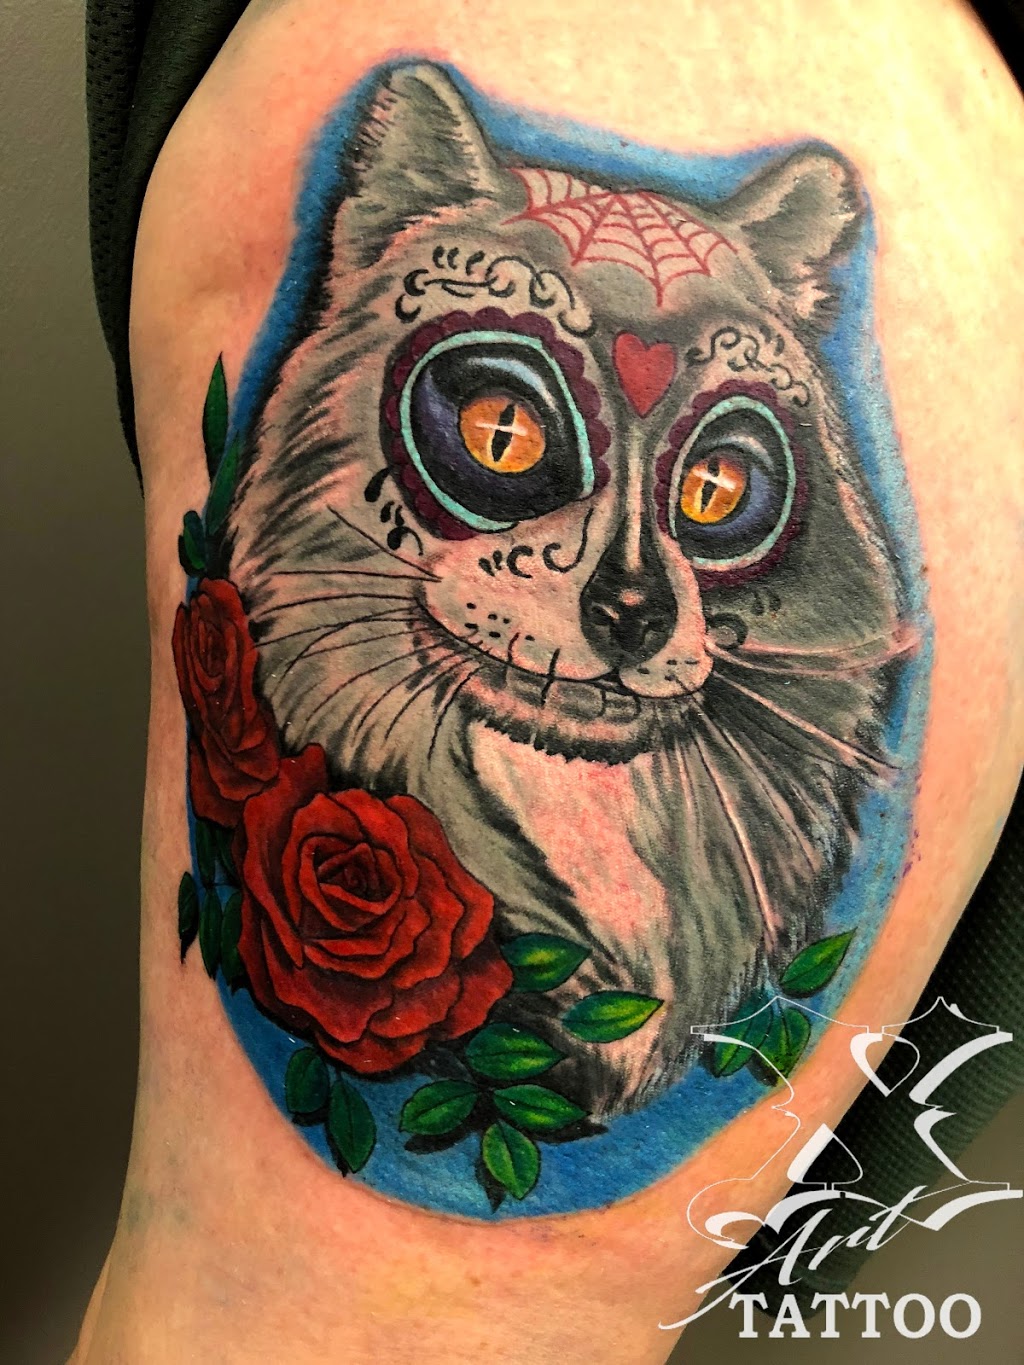 Excessive Art Tattooing - Tattoo Artists In Shepparton | store | 179 Corio St, Shepparton VIC 3630, Australia | 0358216215 OR +61 3 5821 6215